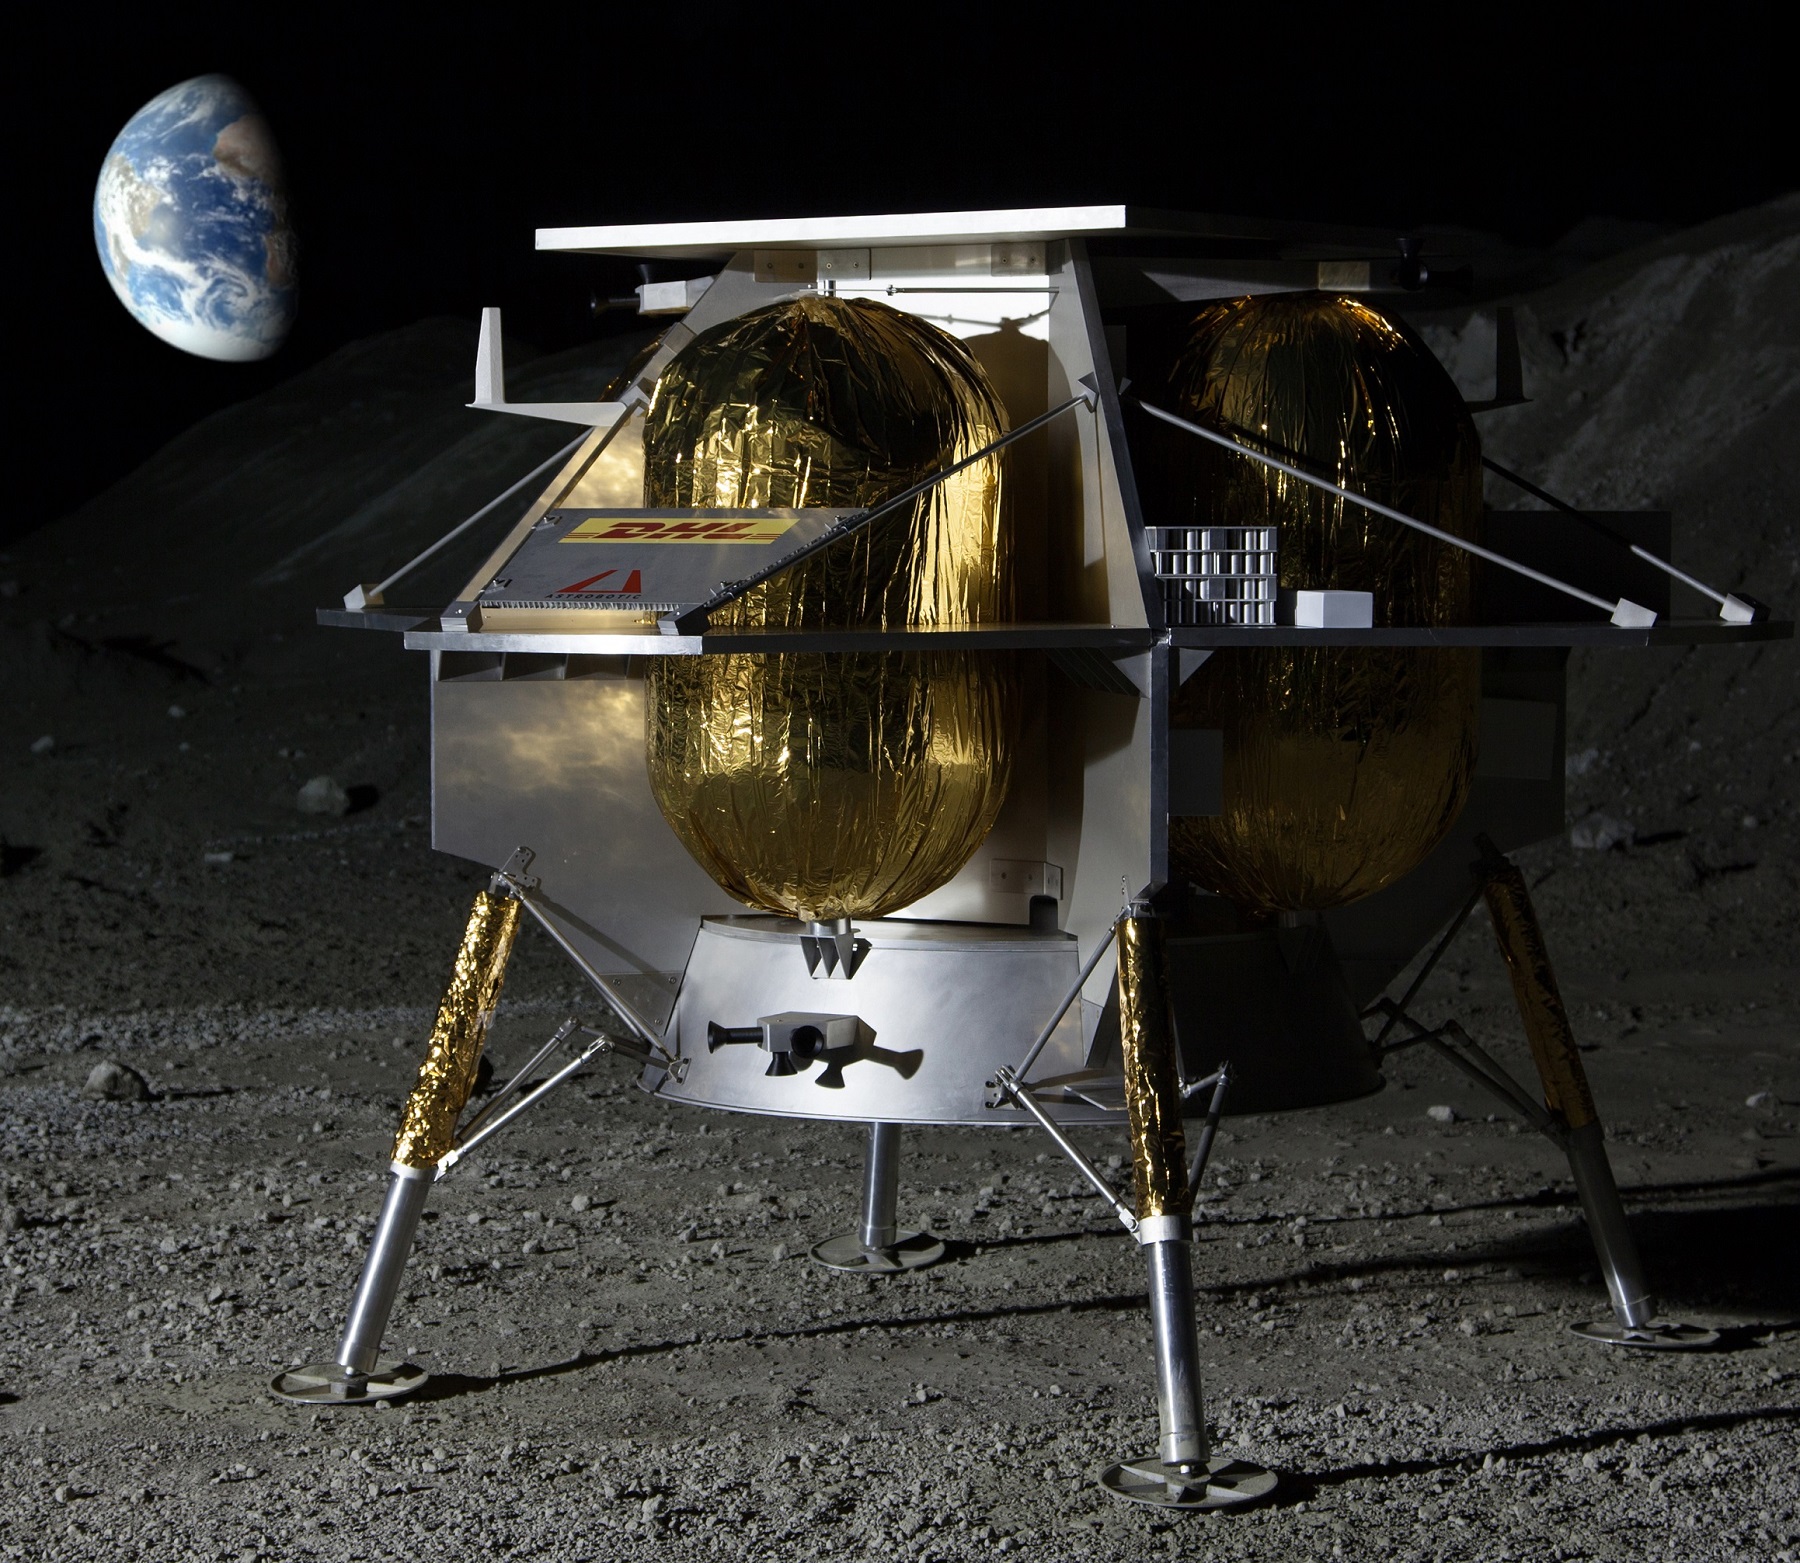 Astrobotic of Pittsburgh has proposed to fly as many as 14 payloads to a large crater on the near side of the Moon.